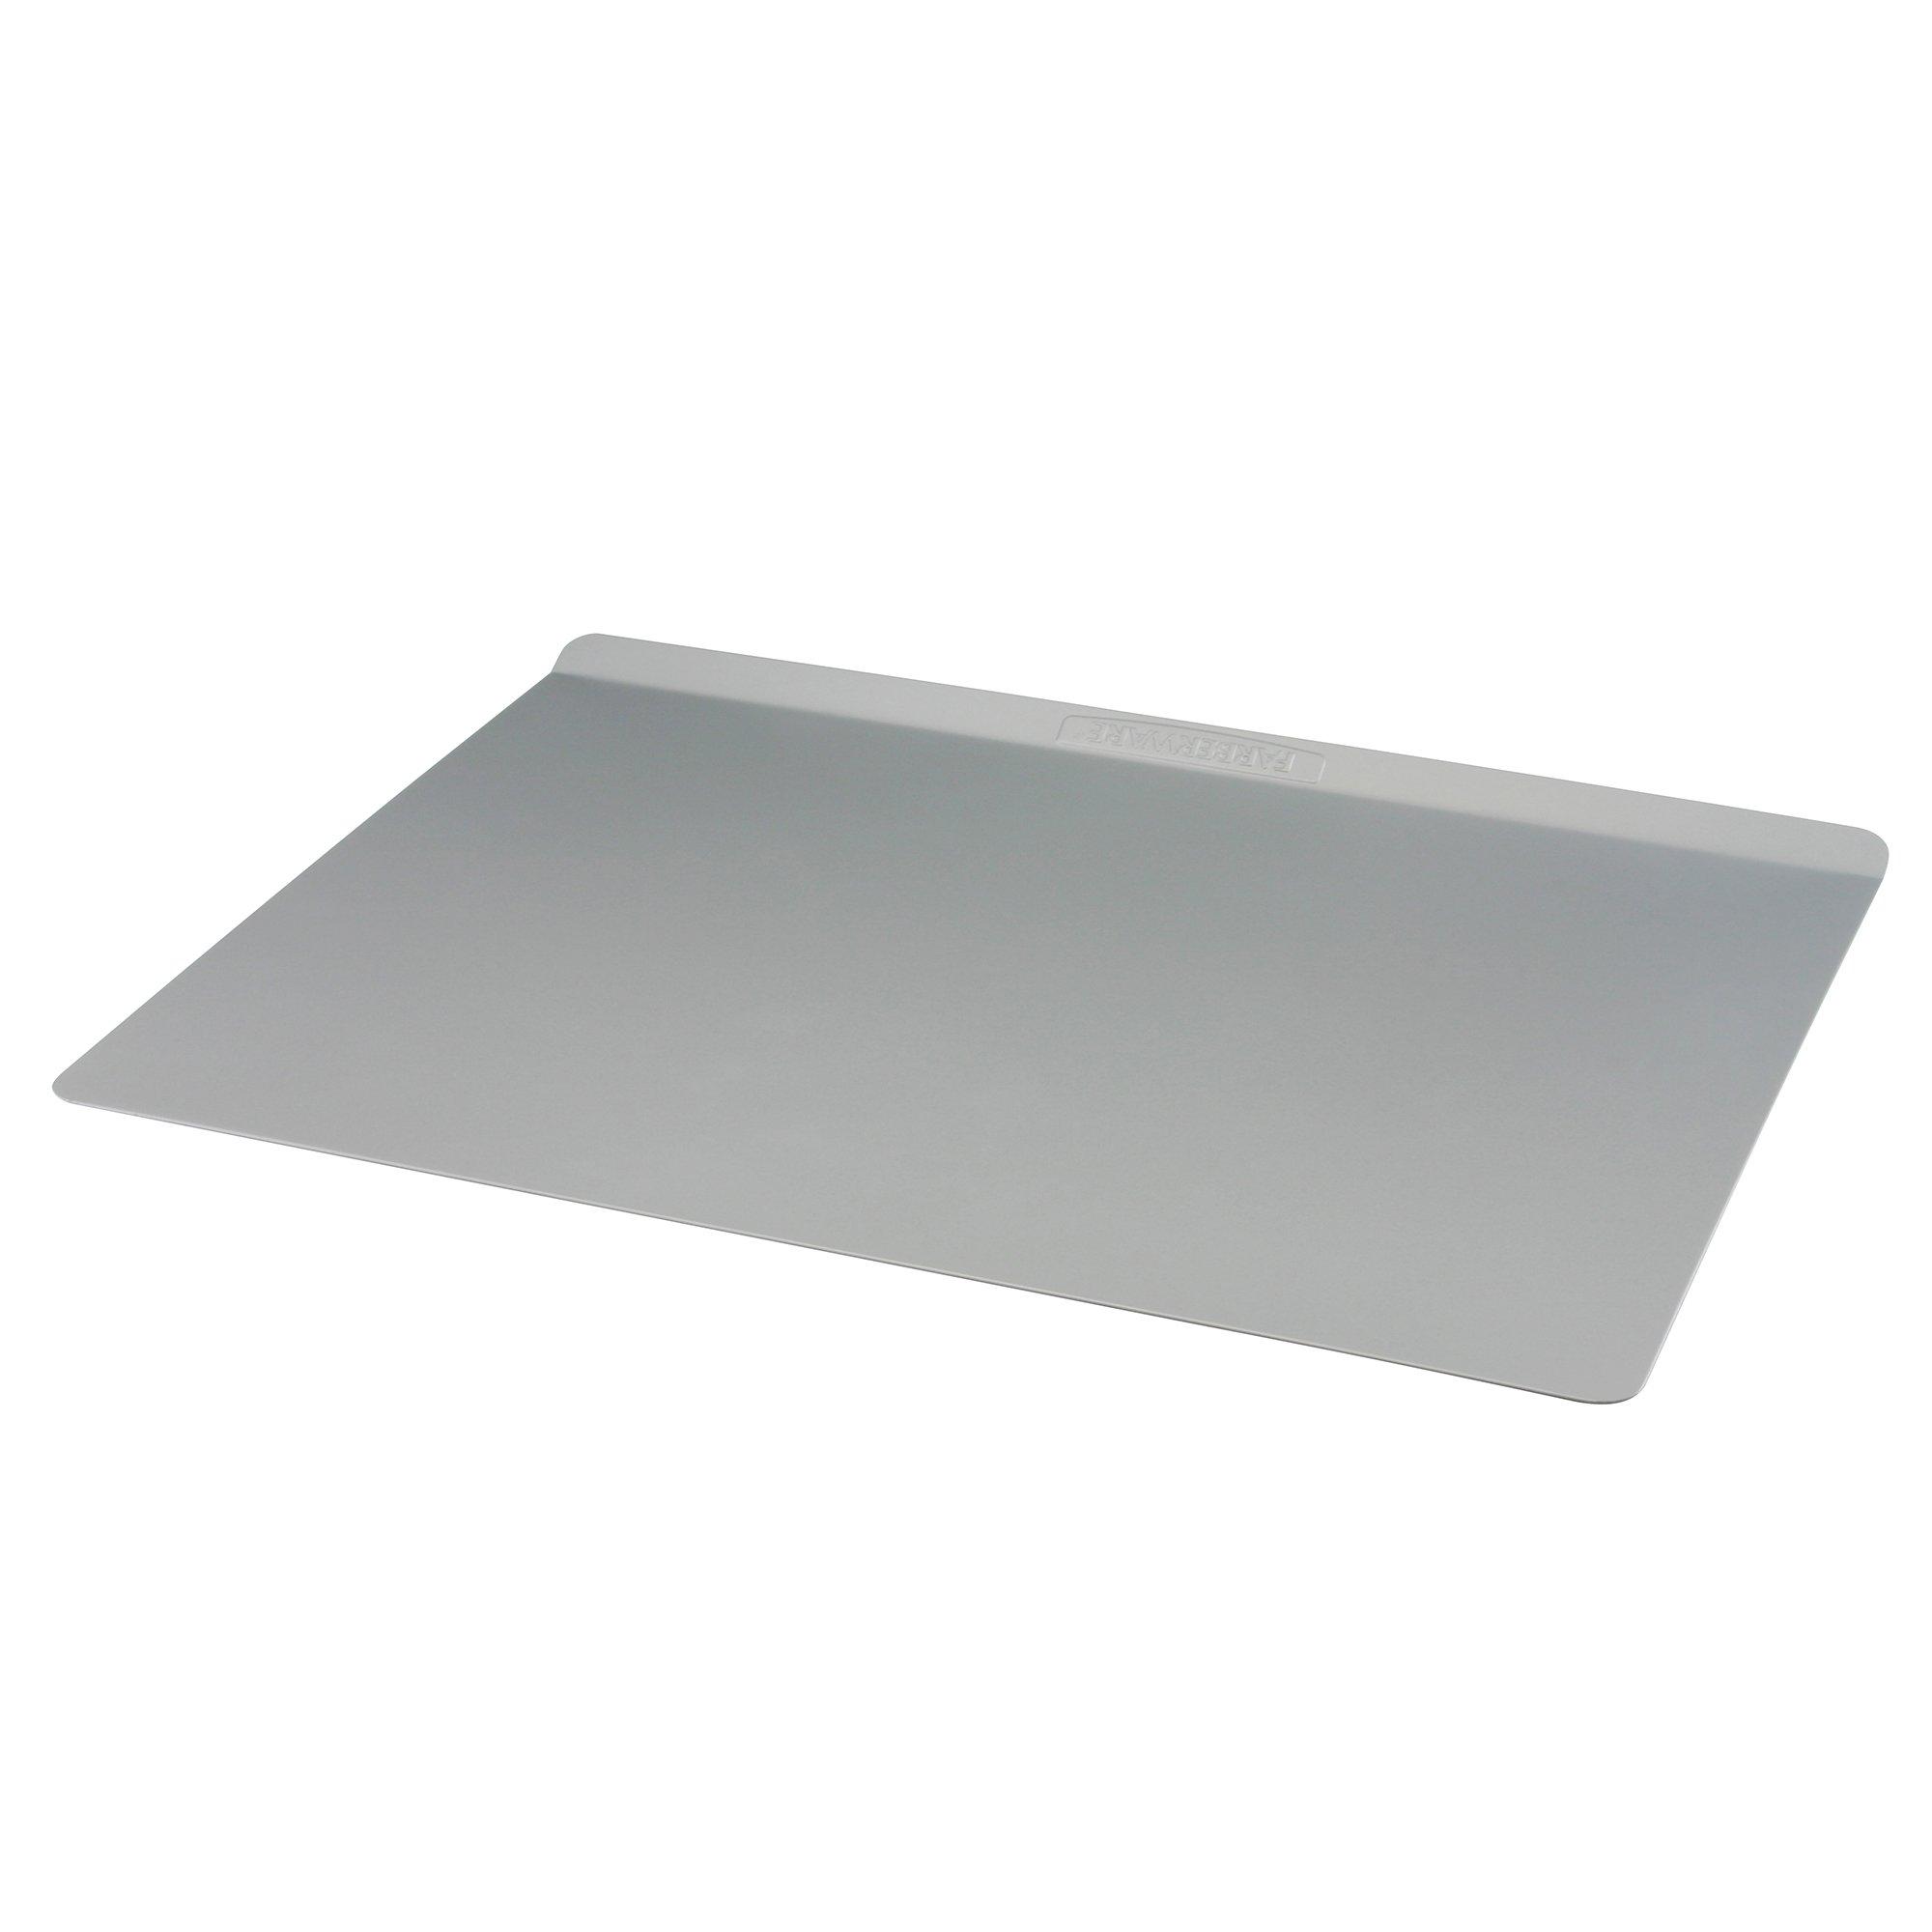 15.5x20 Insulated Cookie Sheet